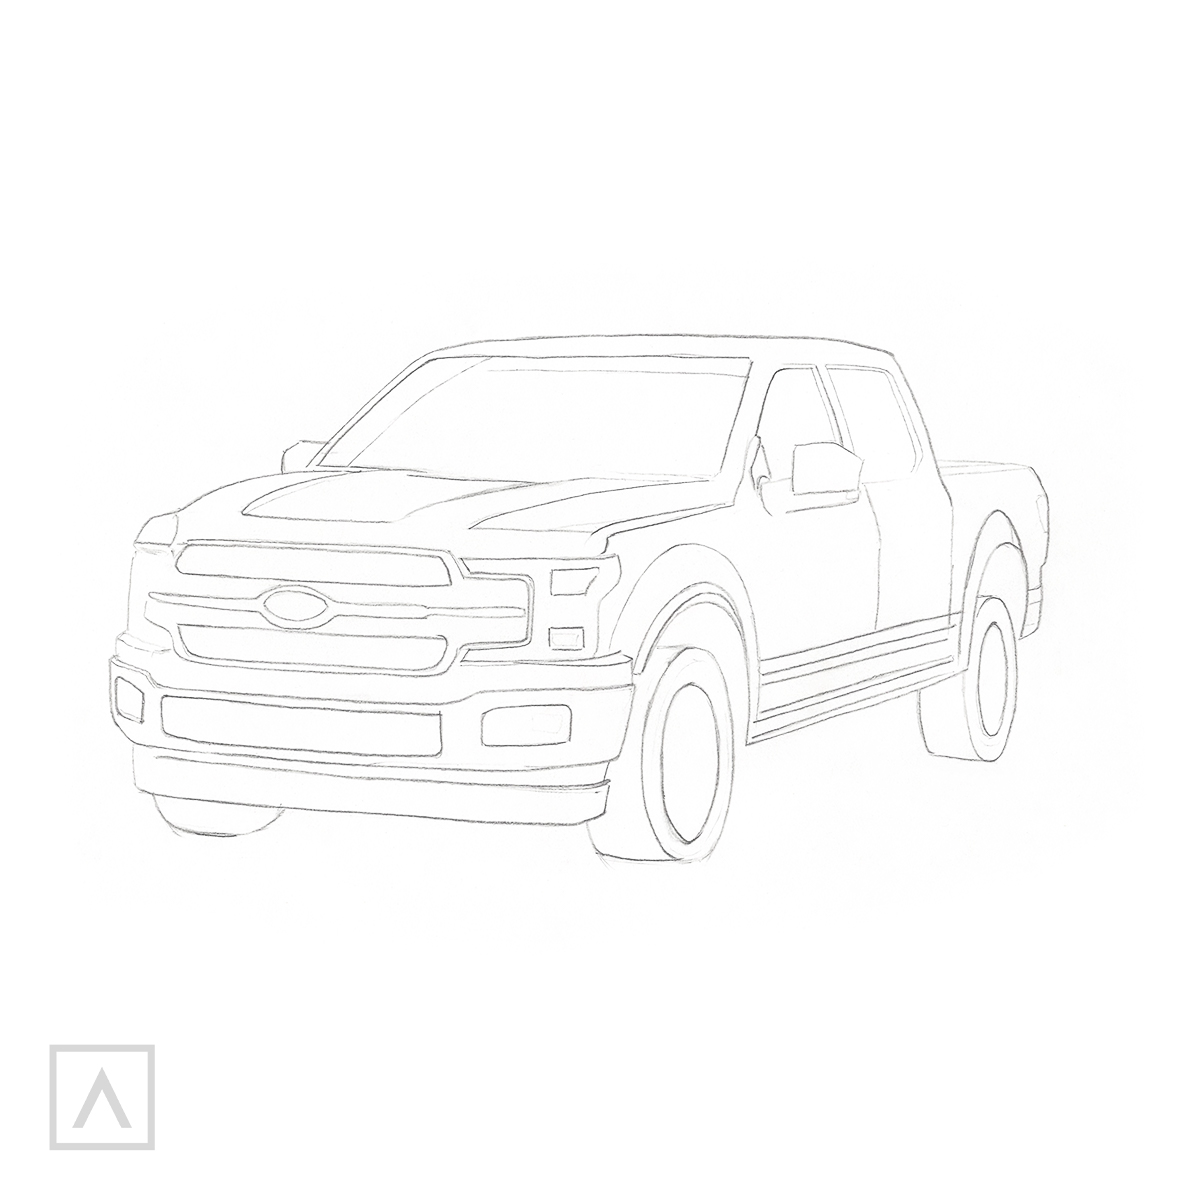 How to Draw a Car - Step 8